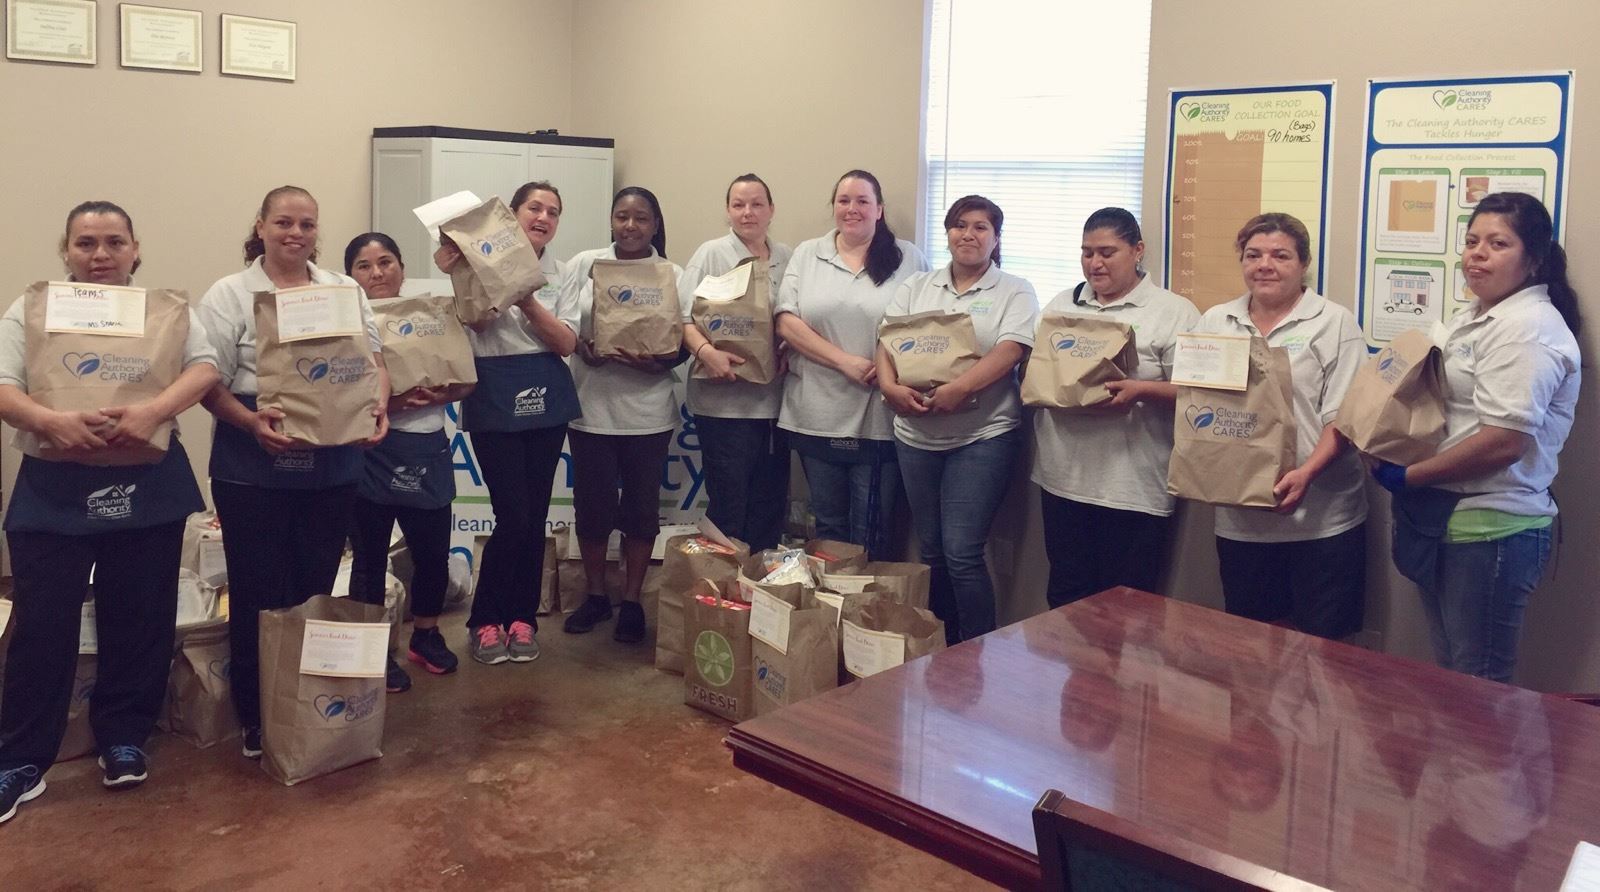 The TCA Tyler team poses in their offices with the donations they collected for a local charity.